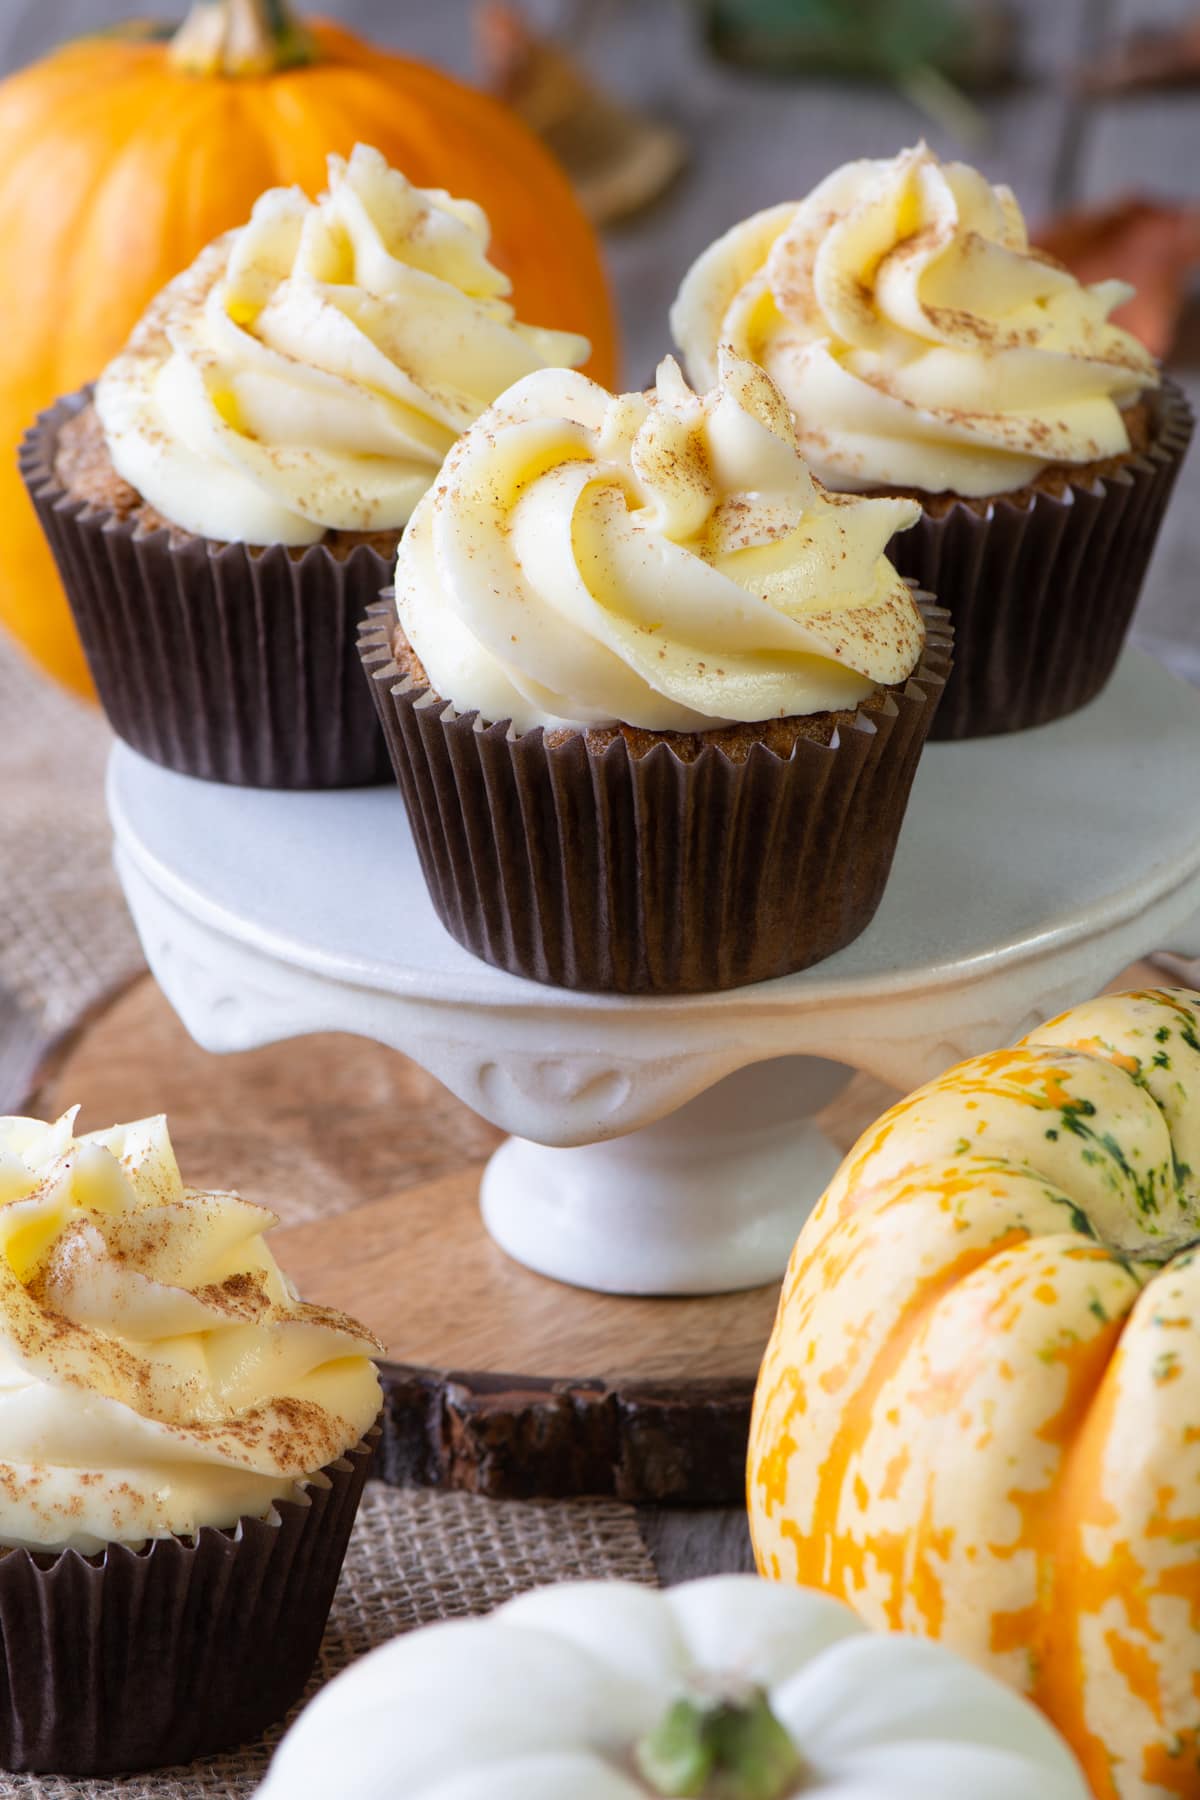 3 cupcakes shown on a cake stand with another cupcake shown in front with several small pumpkins in view. 